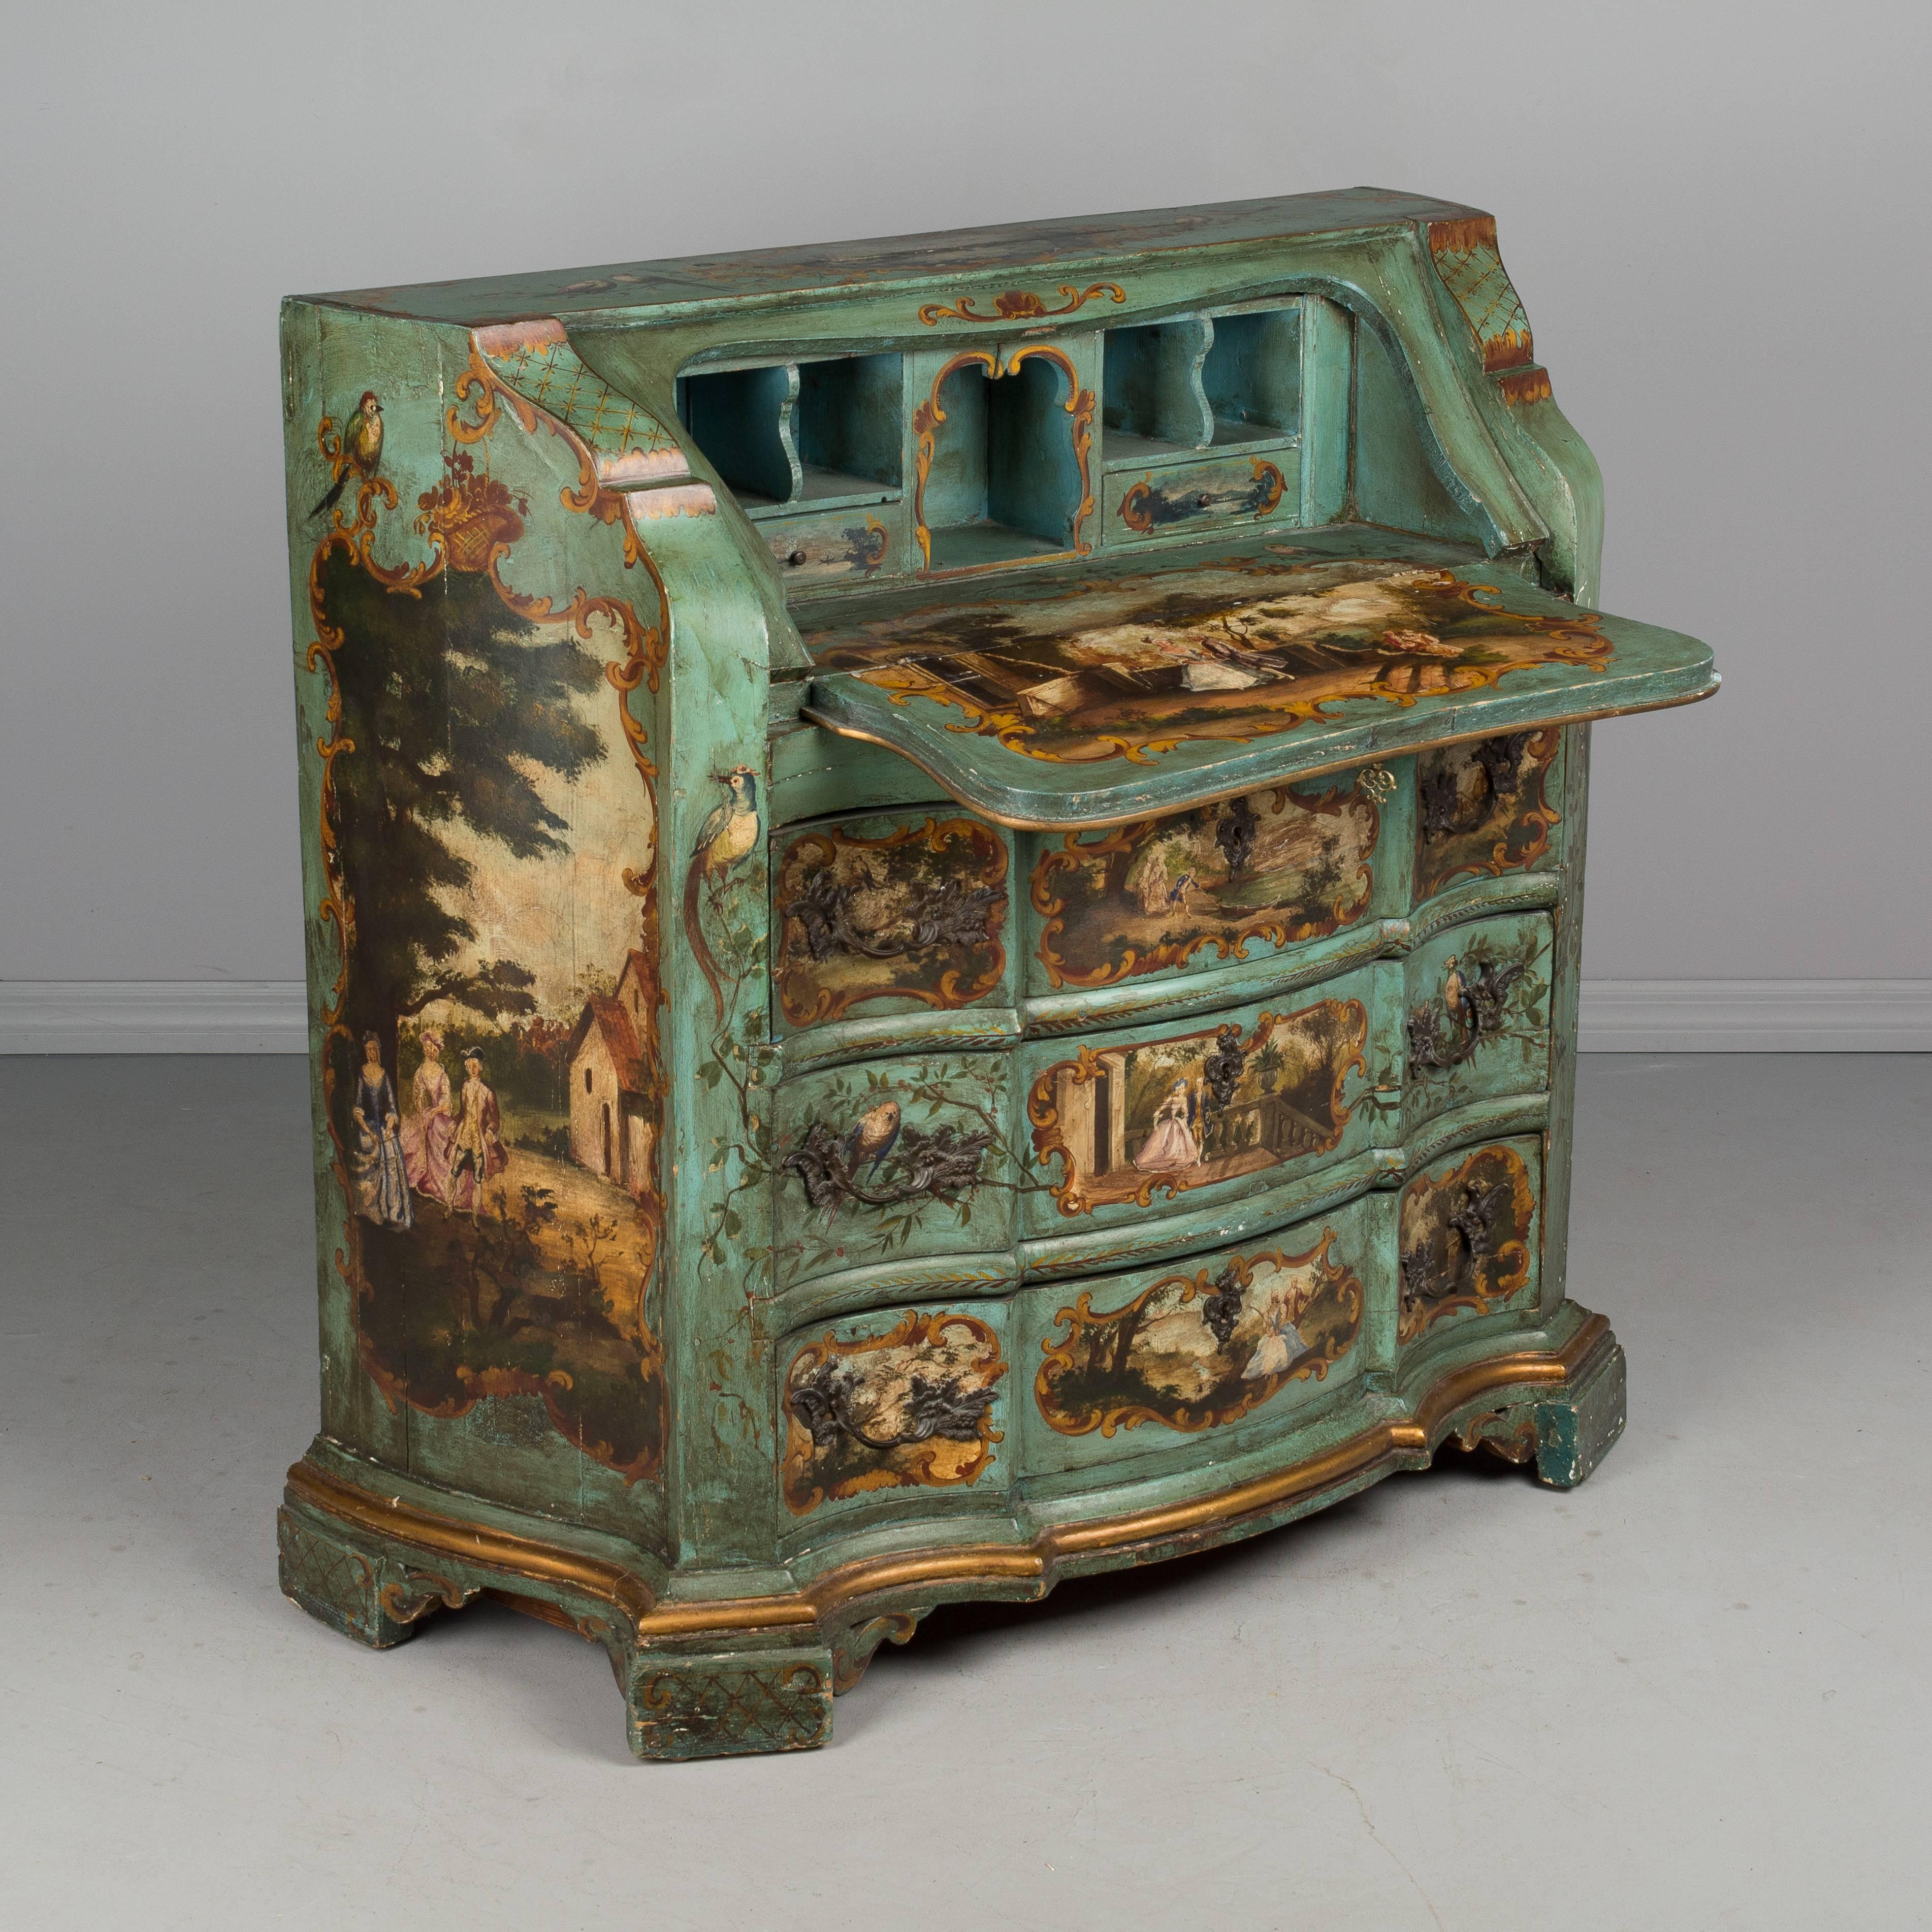 An Italian painted pine slant front desk with serpentine sides and arbalete front. Beautifully painted with romantic rococo style pastoral vignettes, birds and flowers and accented with gold borders. Desk opens to painted surface with small drawers